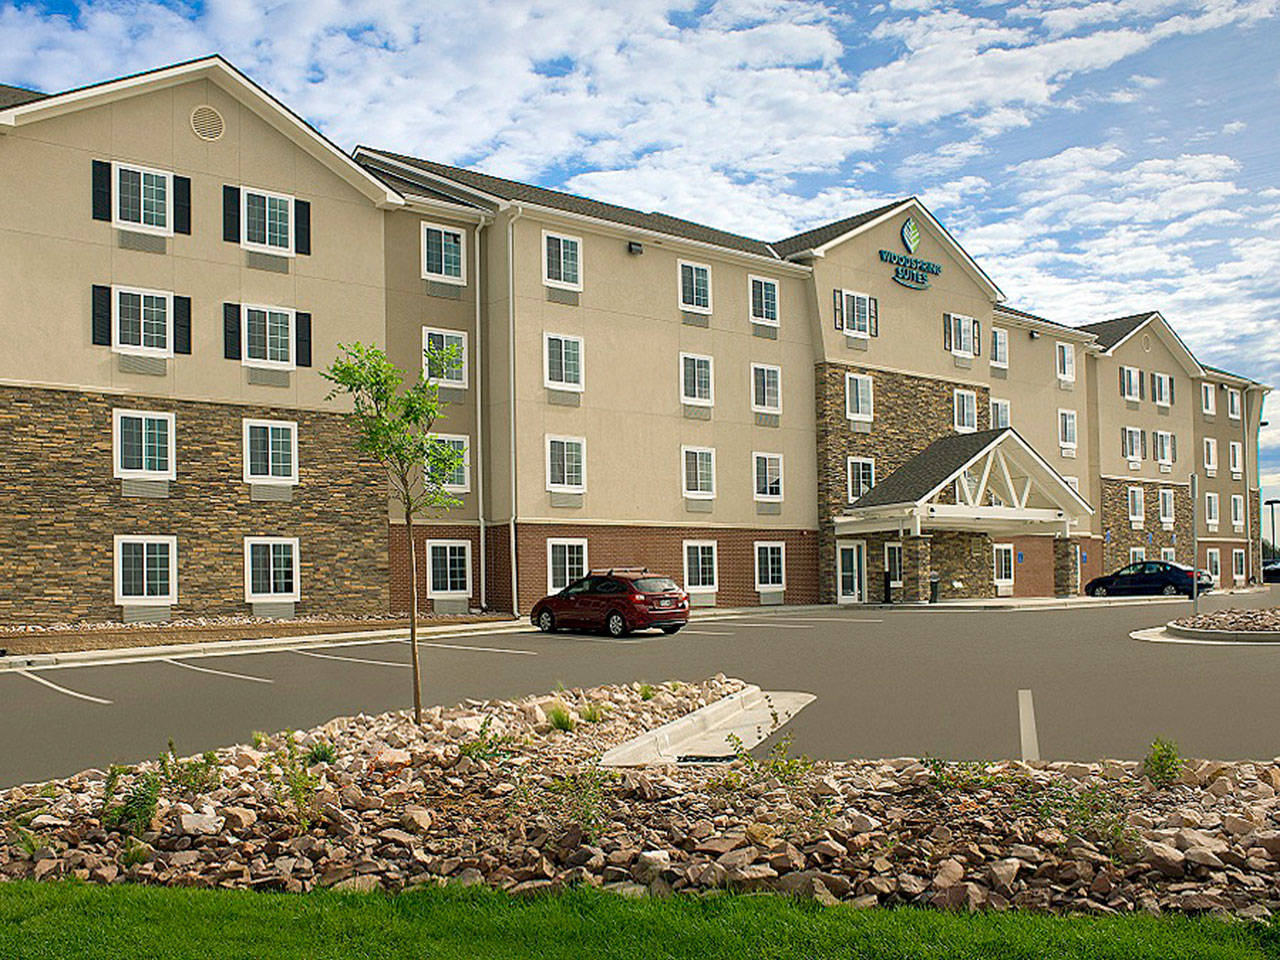 An example of a WoodSpring Suites Hotel. A similar hotel could be coming to Kent in the next couple of years. Courtesy Photo